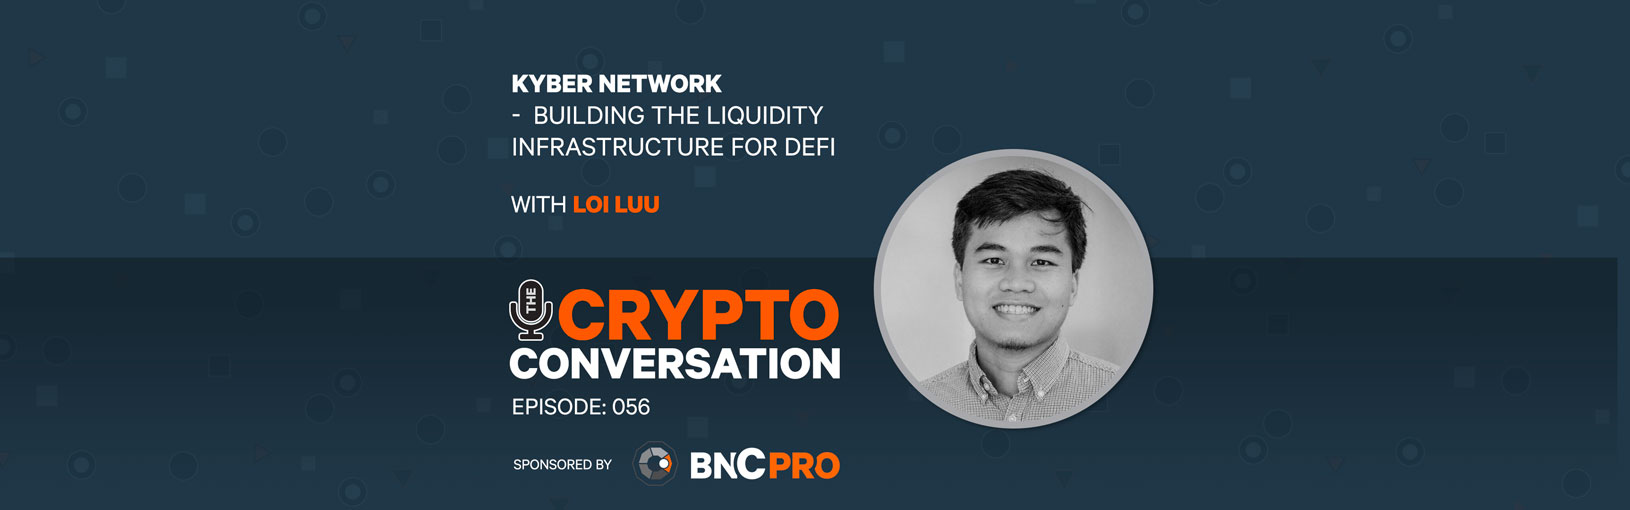 Kyber Network – building the liquidity infrastructure for DeFi